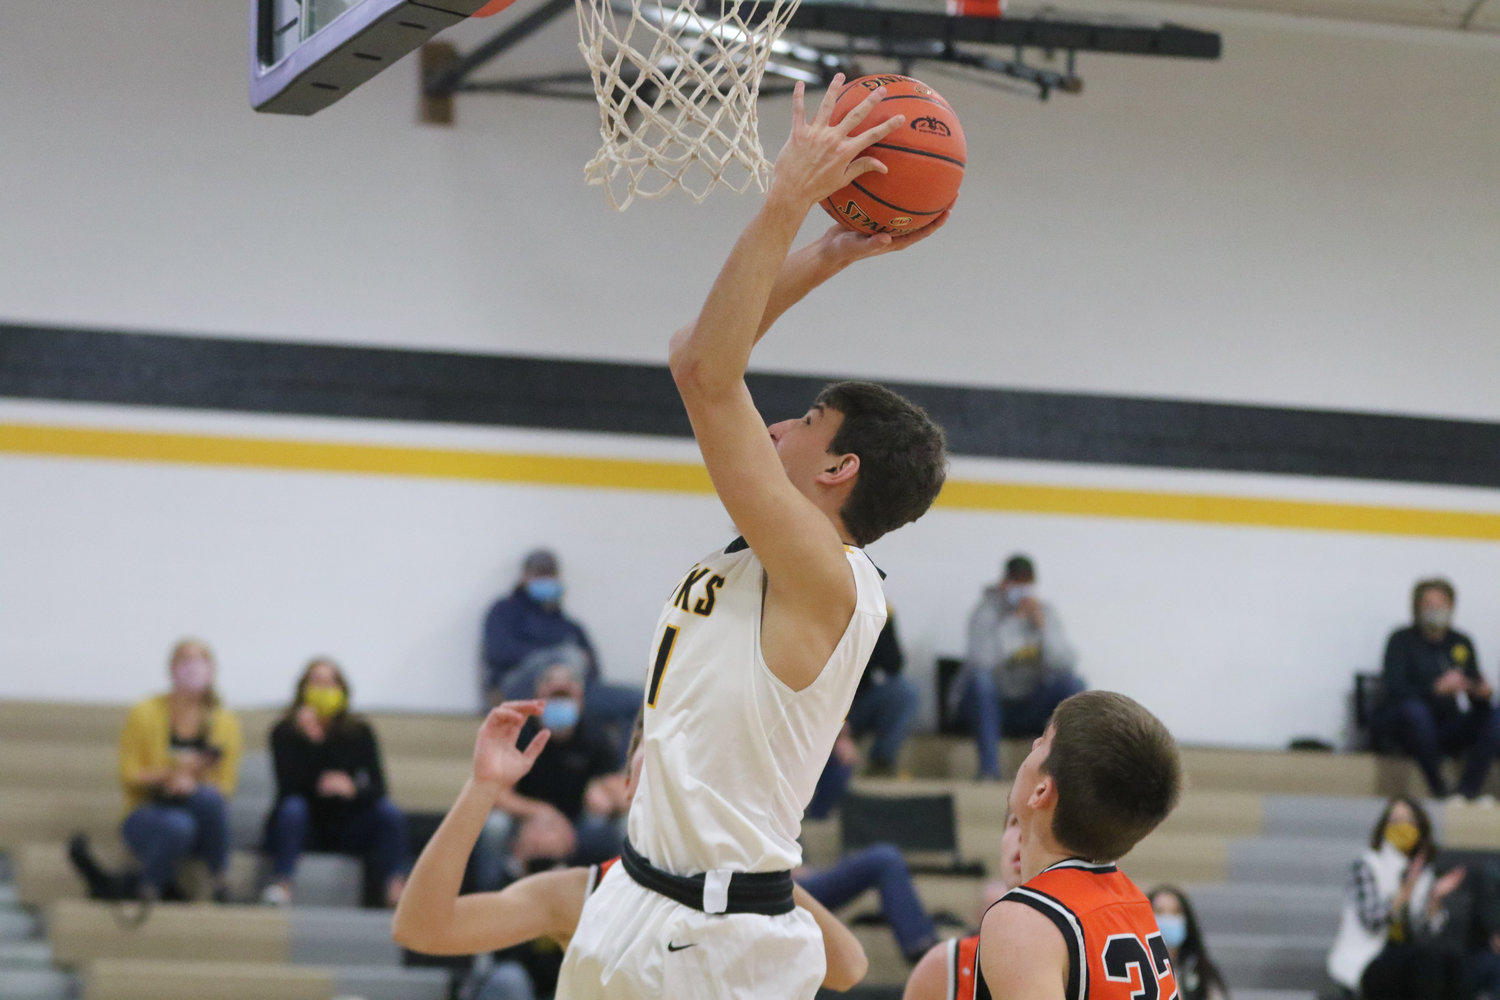 Ethan Kos puts up a shot in the paint during the first quarter of a scrimmage with Mediapolis in Wellman on Saturday, November 21.